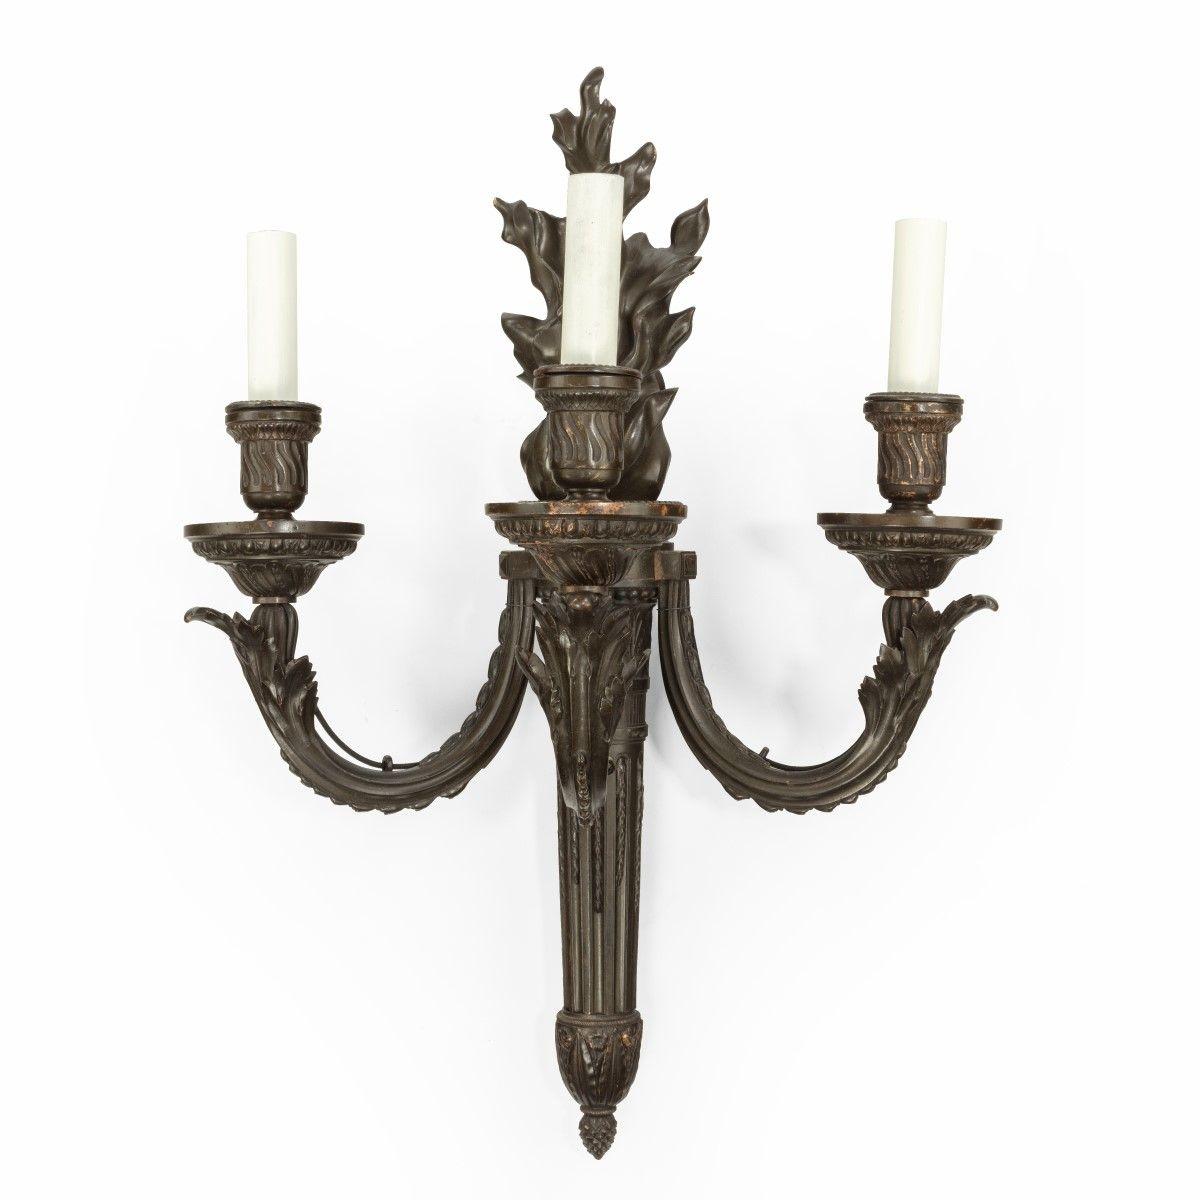 A pair of French bronze wall-lights, each in the form of classical torch with a flambé top supporting three arms, decorated with stop-fluting and classical motifs, now fitted for electricity. Circa 1880.